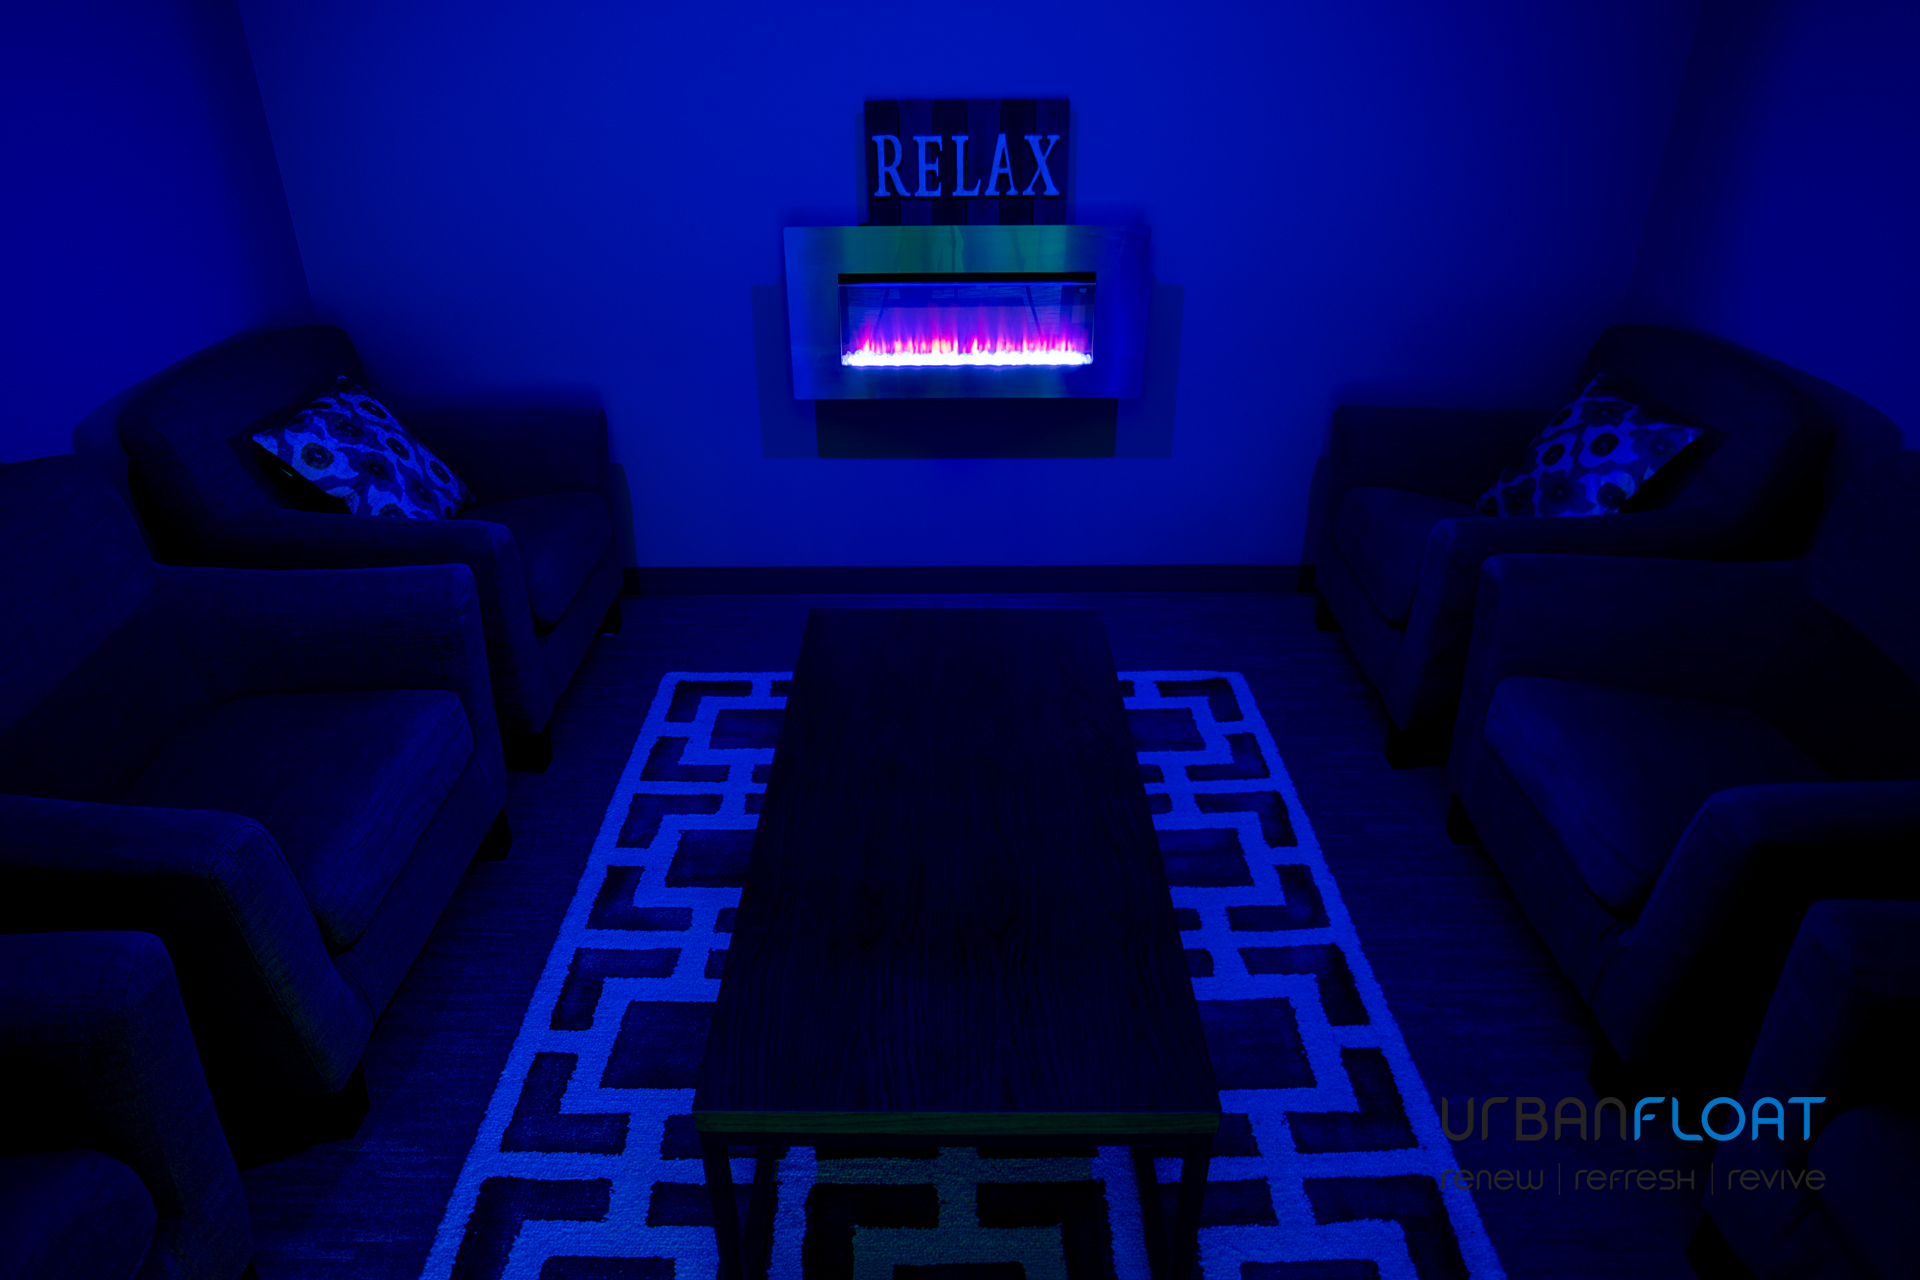 Urban Float Relaxation Room